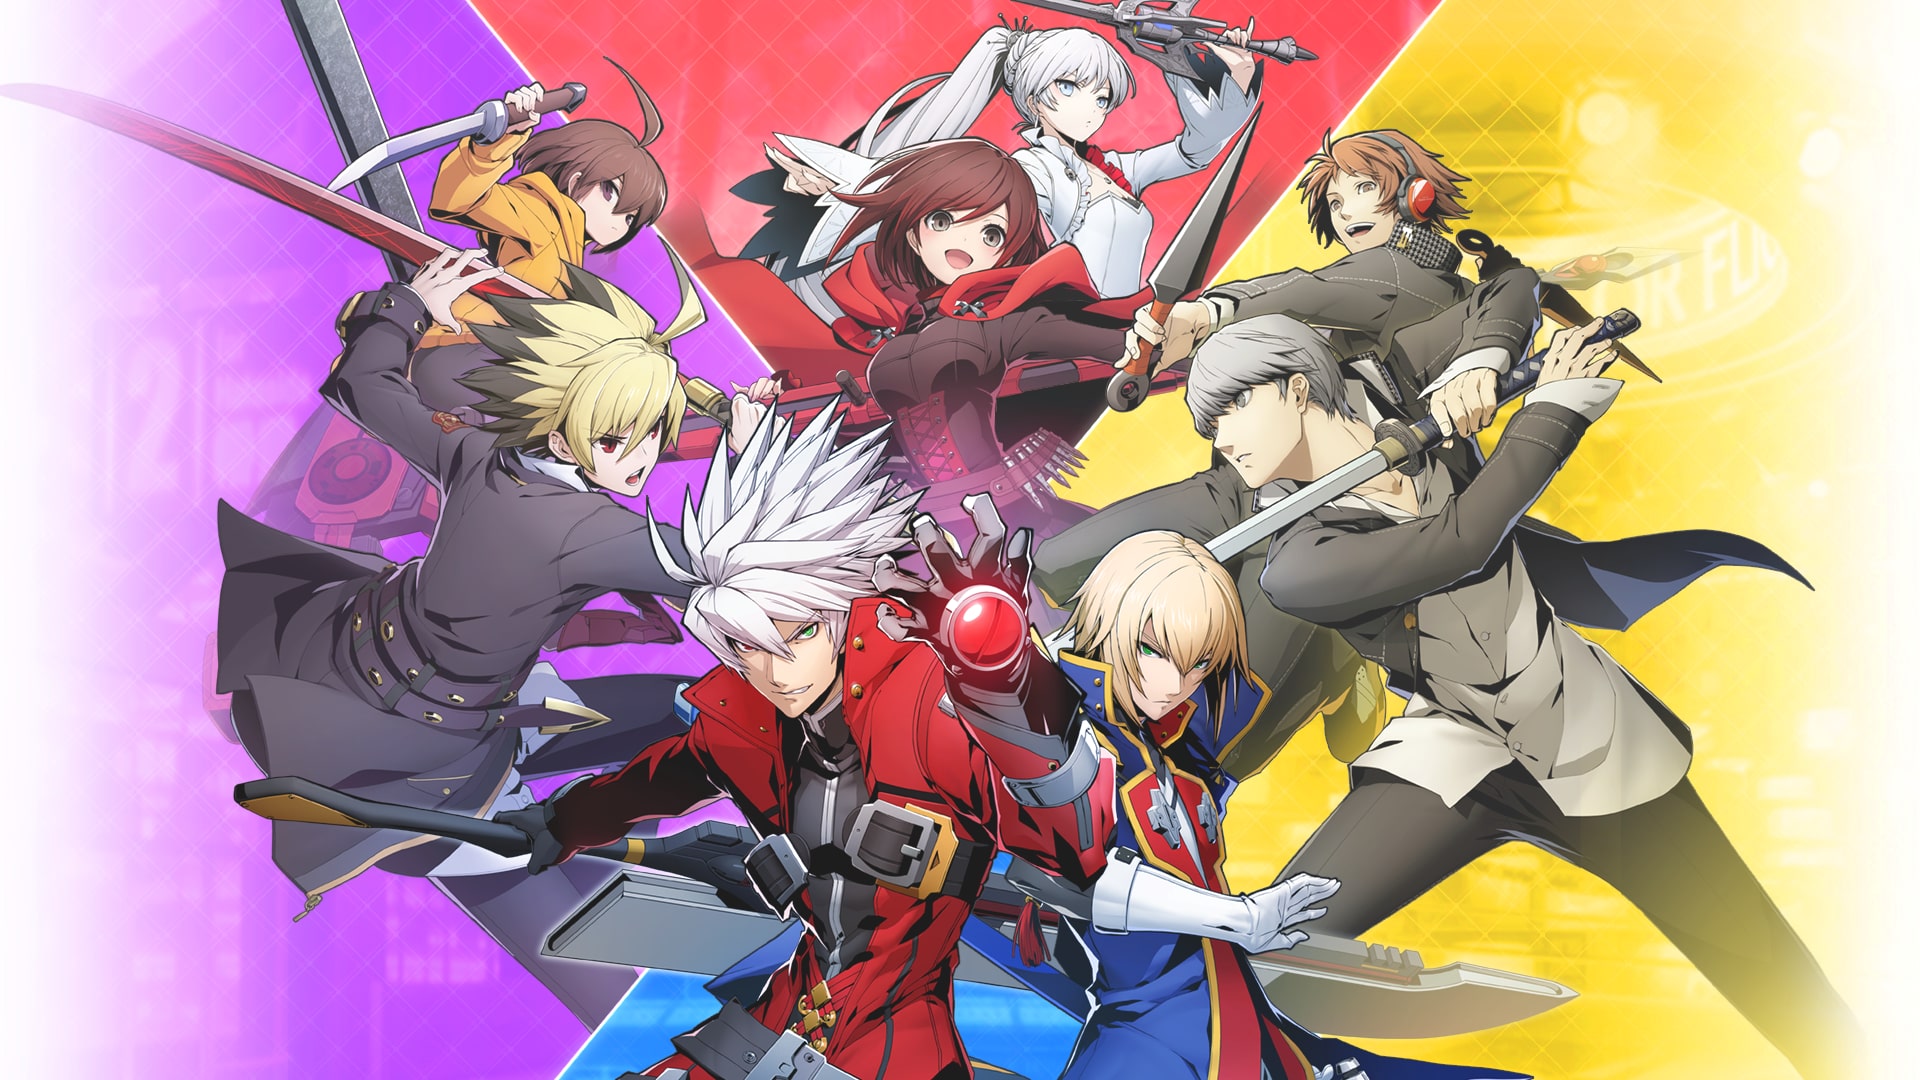 BlazBlue Coss Tag Battle Ver 2.0 Expansion Pack